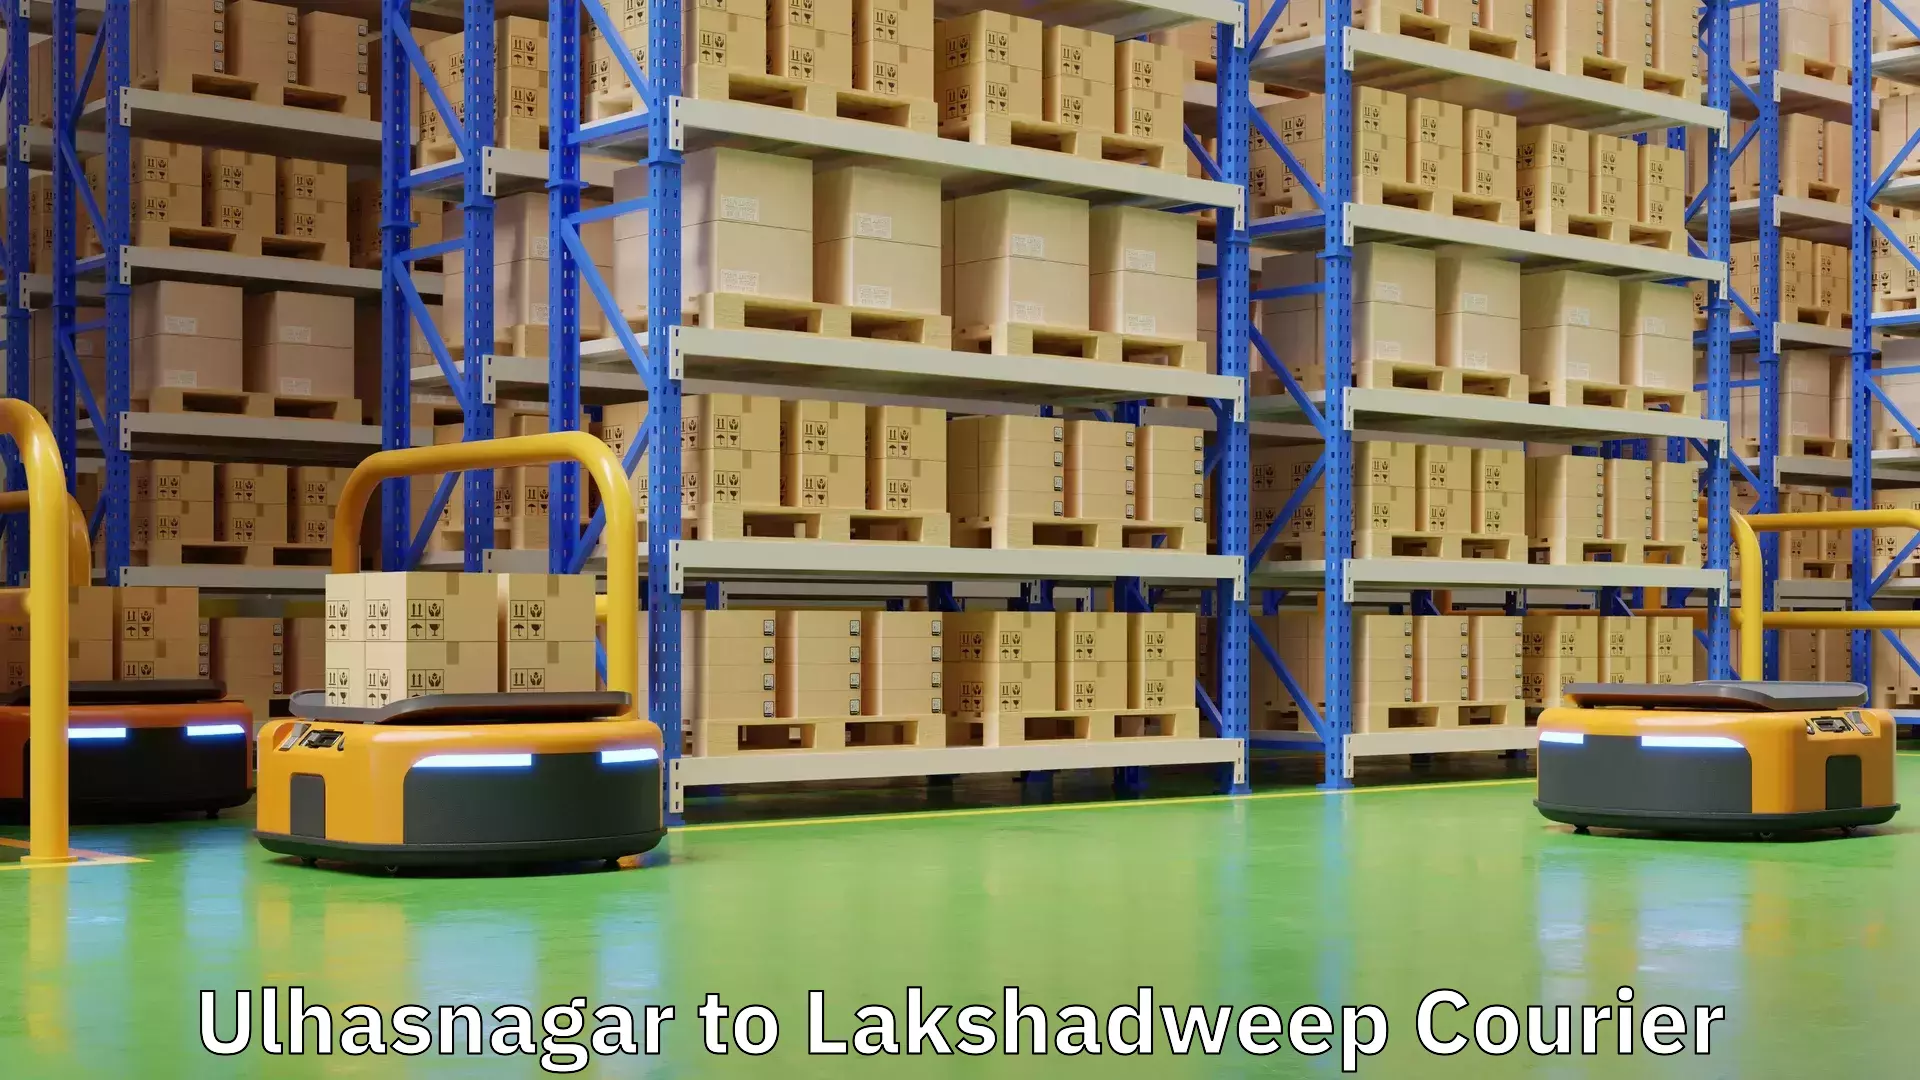 Online courier booking Ulhasnagar to Lakshadweep